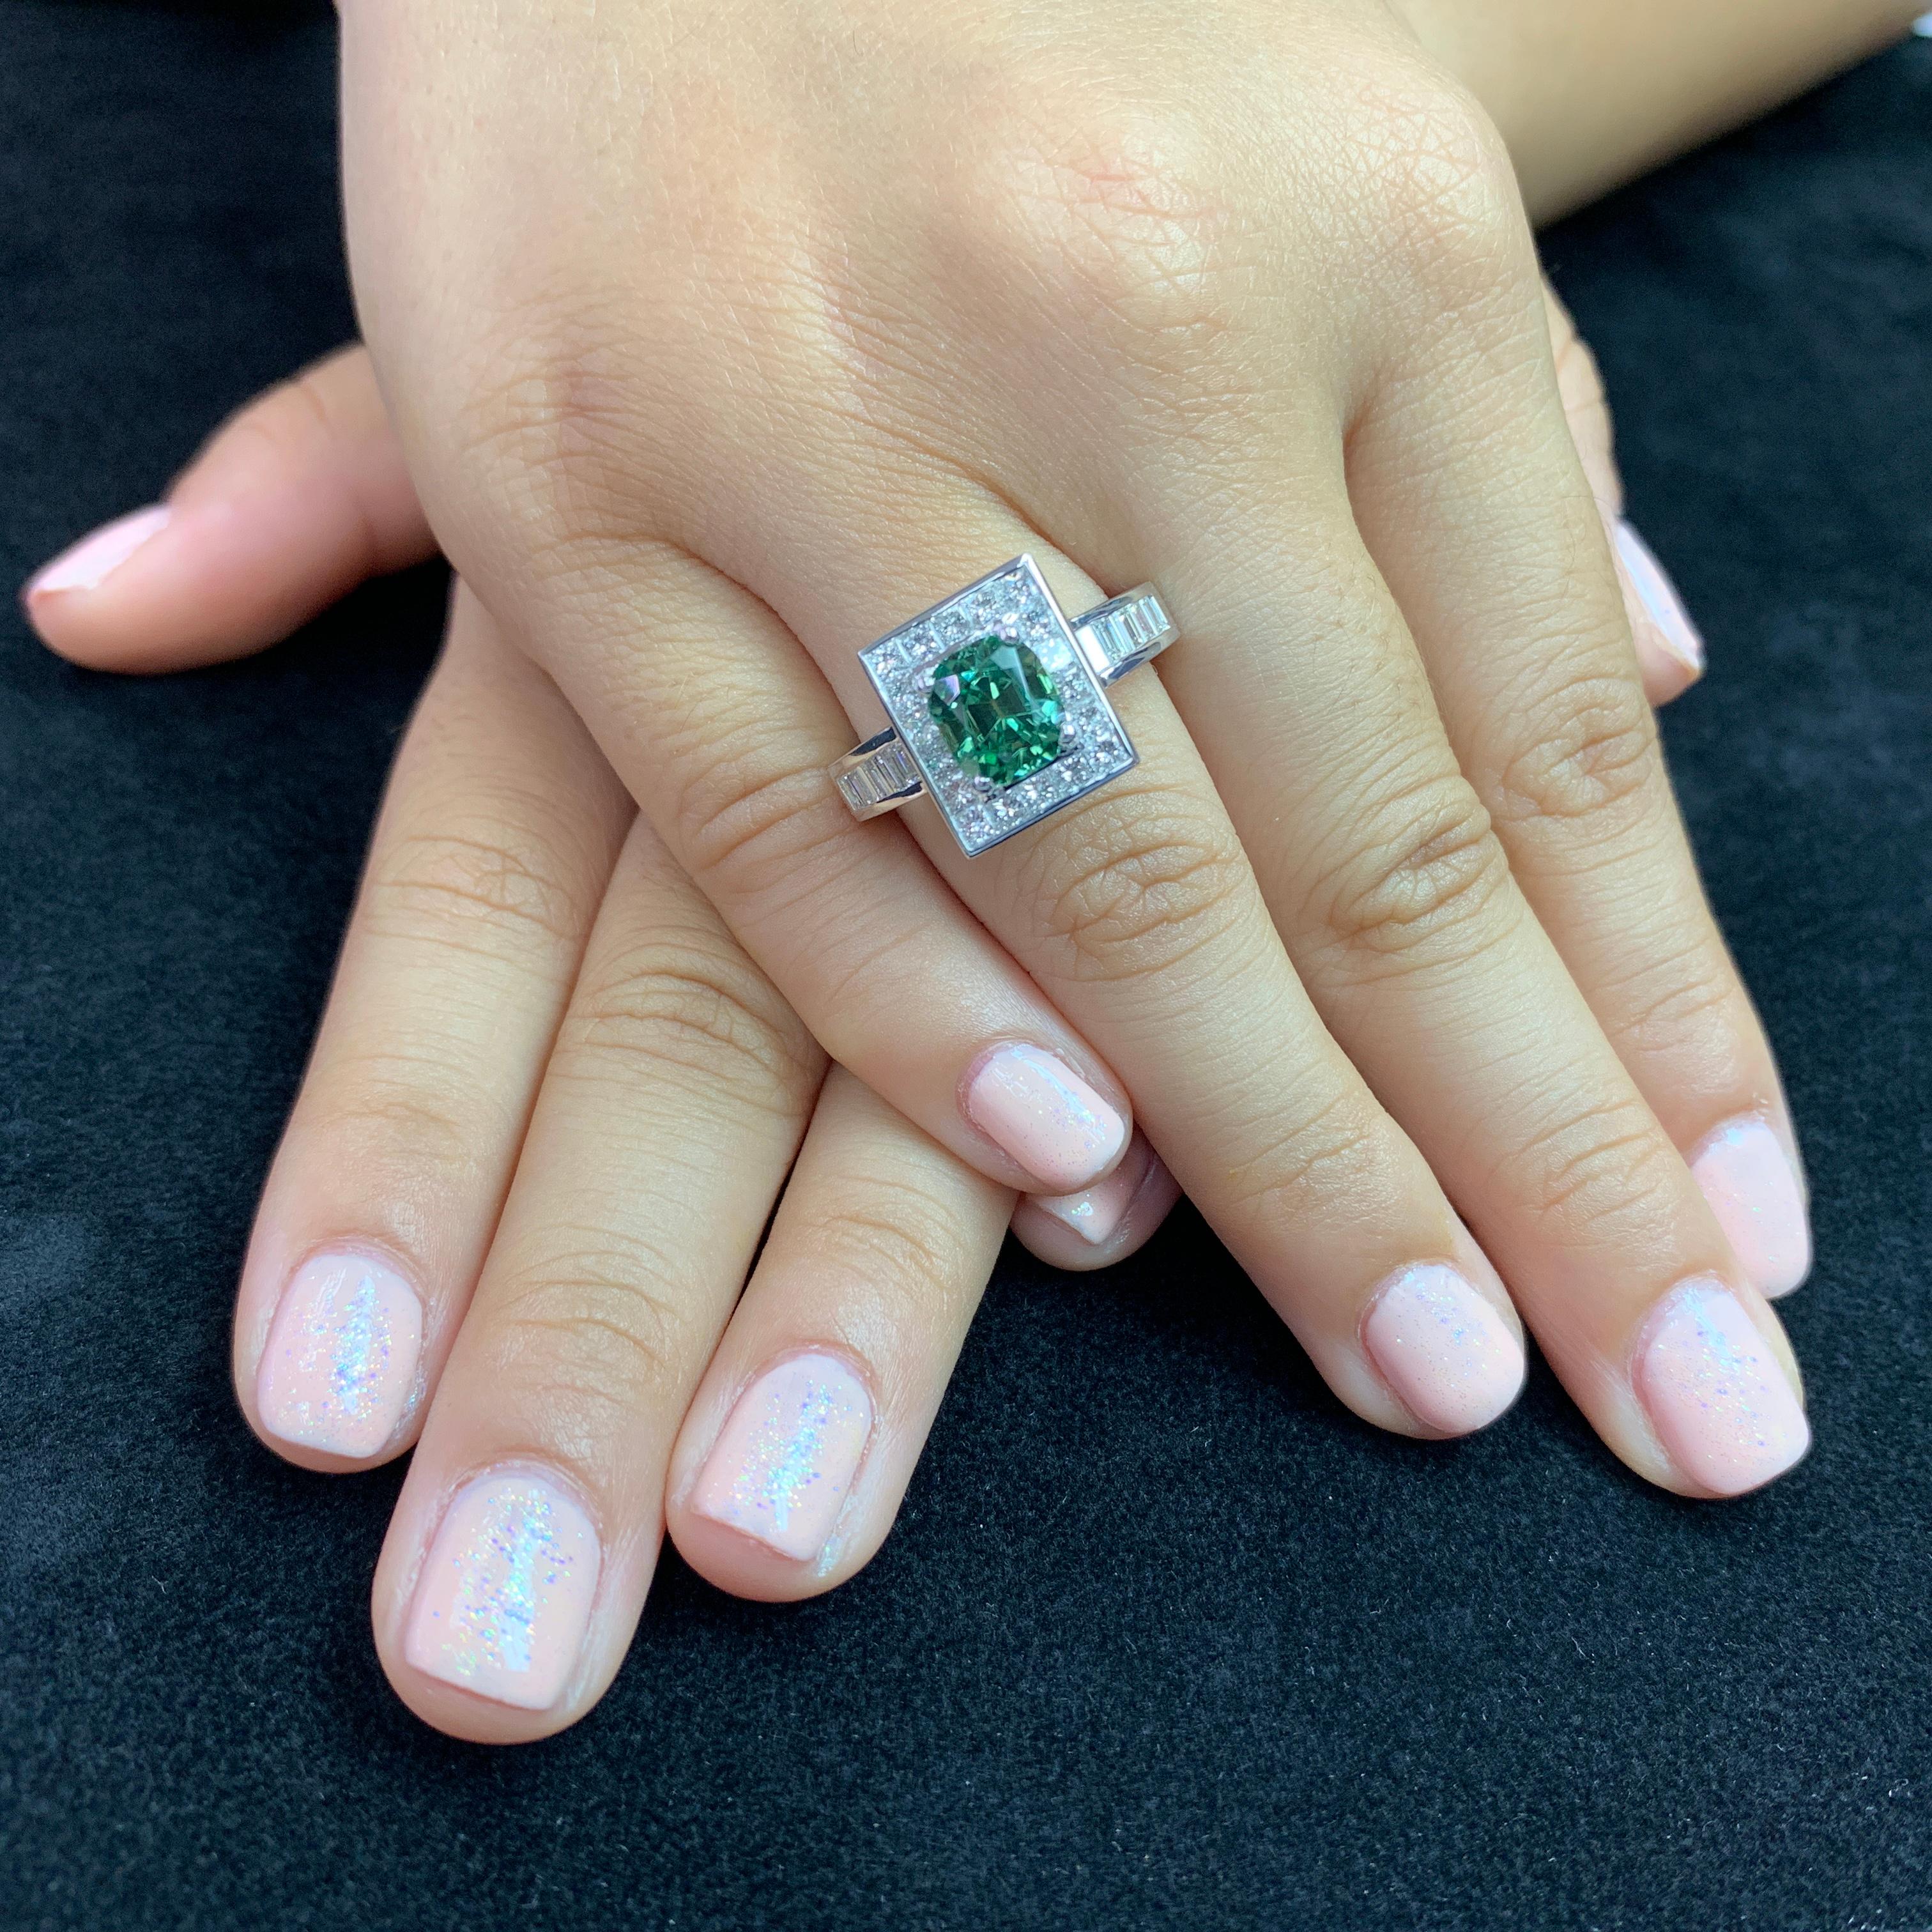 Here is a beautiful mint green tourmaline 2.02cts and diamond ring. The ring is set in 18k white gold and diamonds. There are 18 princess cut diamonds in this setting totaling 0.77 cts and 18 baguette cut diamonds totaling 0.51 cts. All in all 1.28